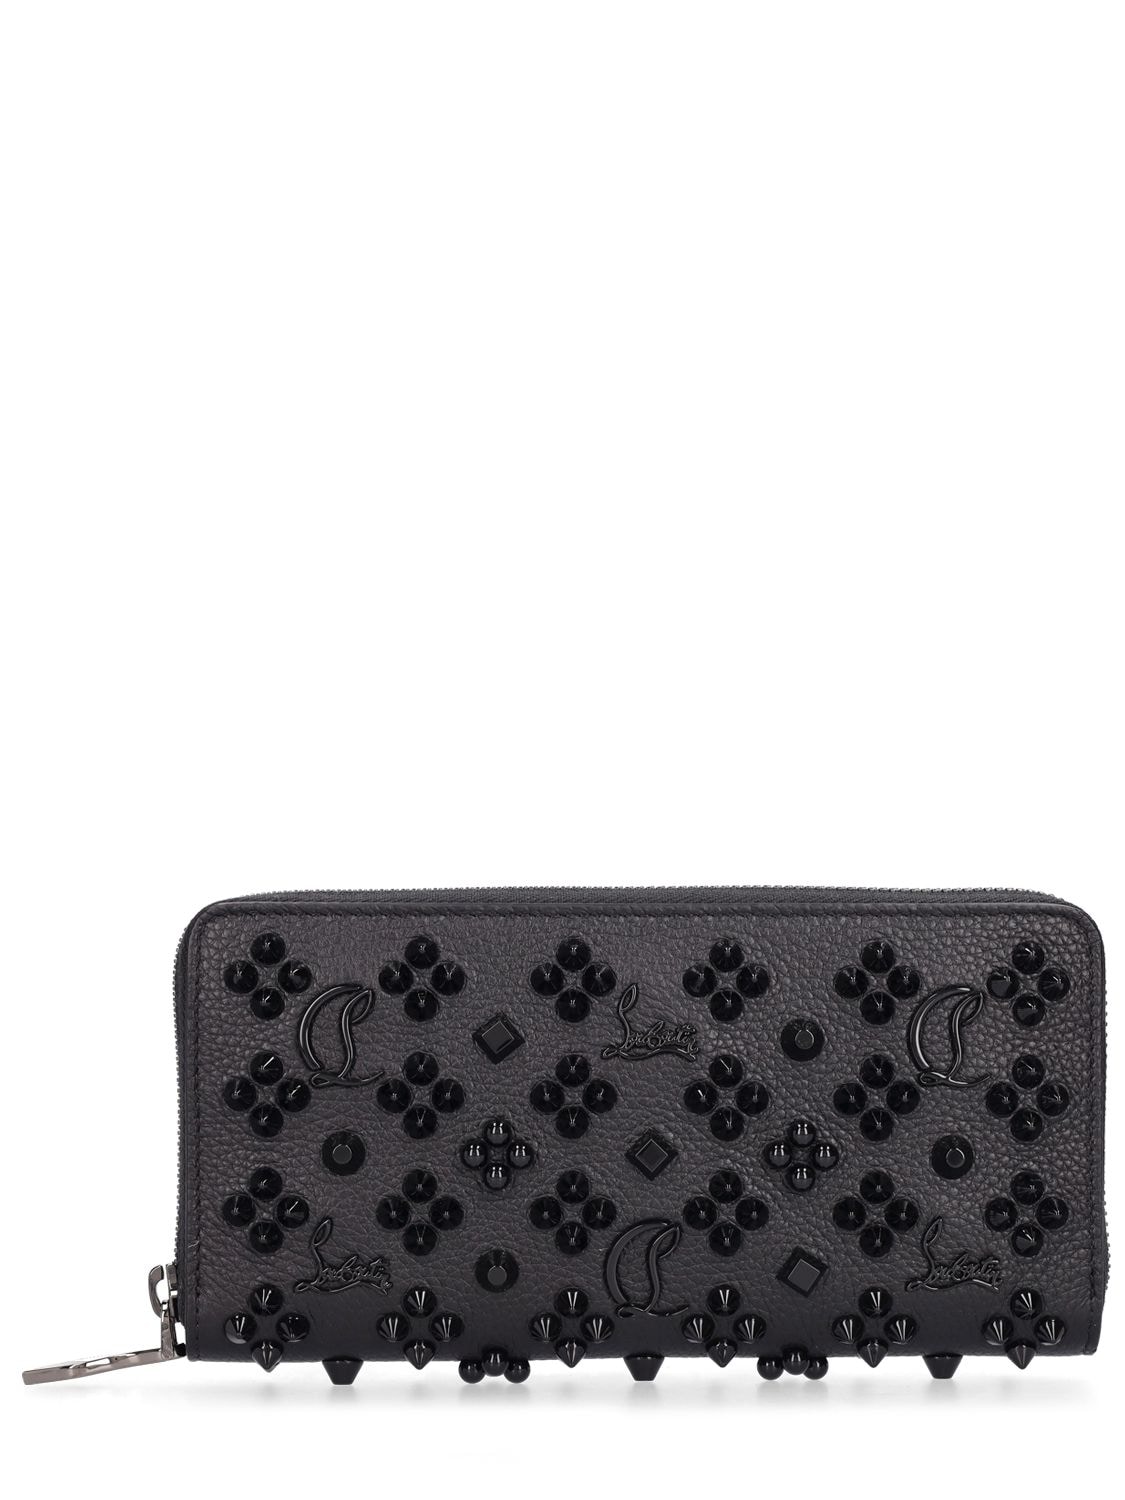 Christian Louboutin Panettone Leather Wallet In Black